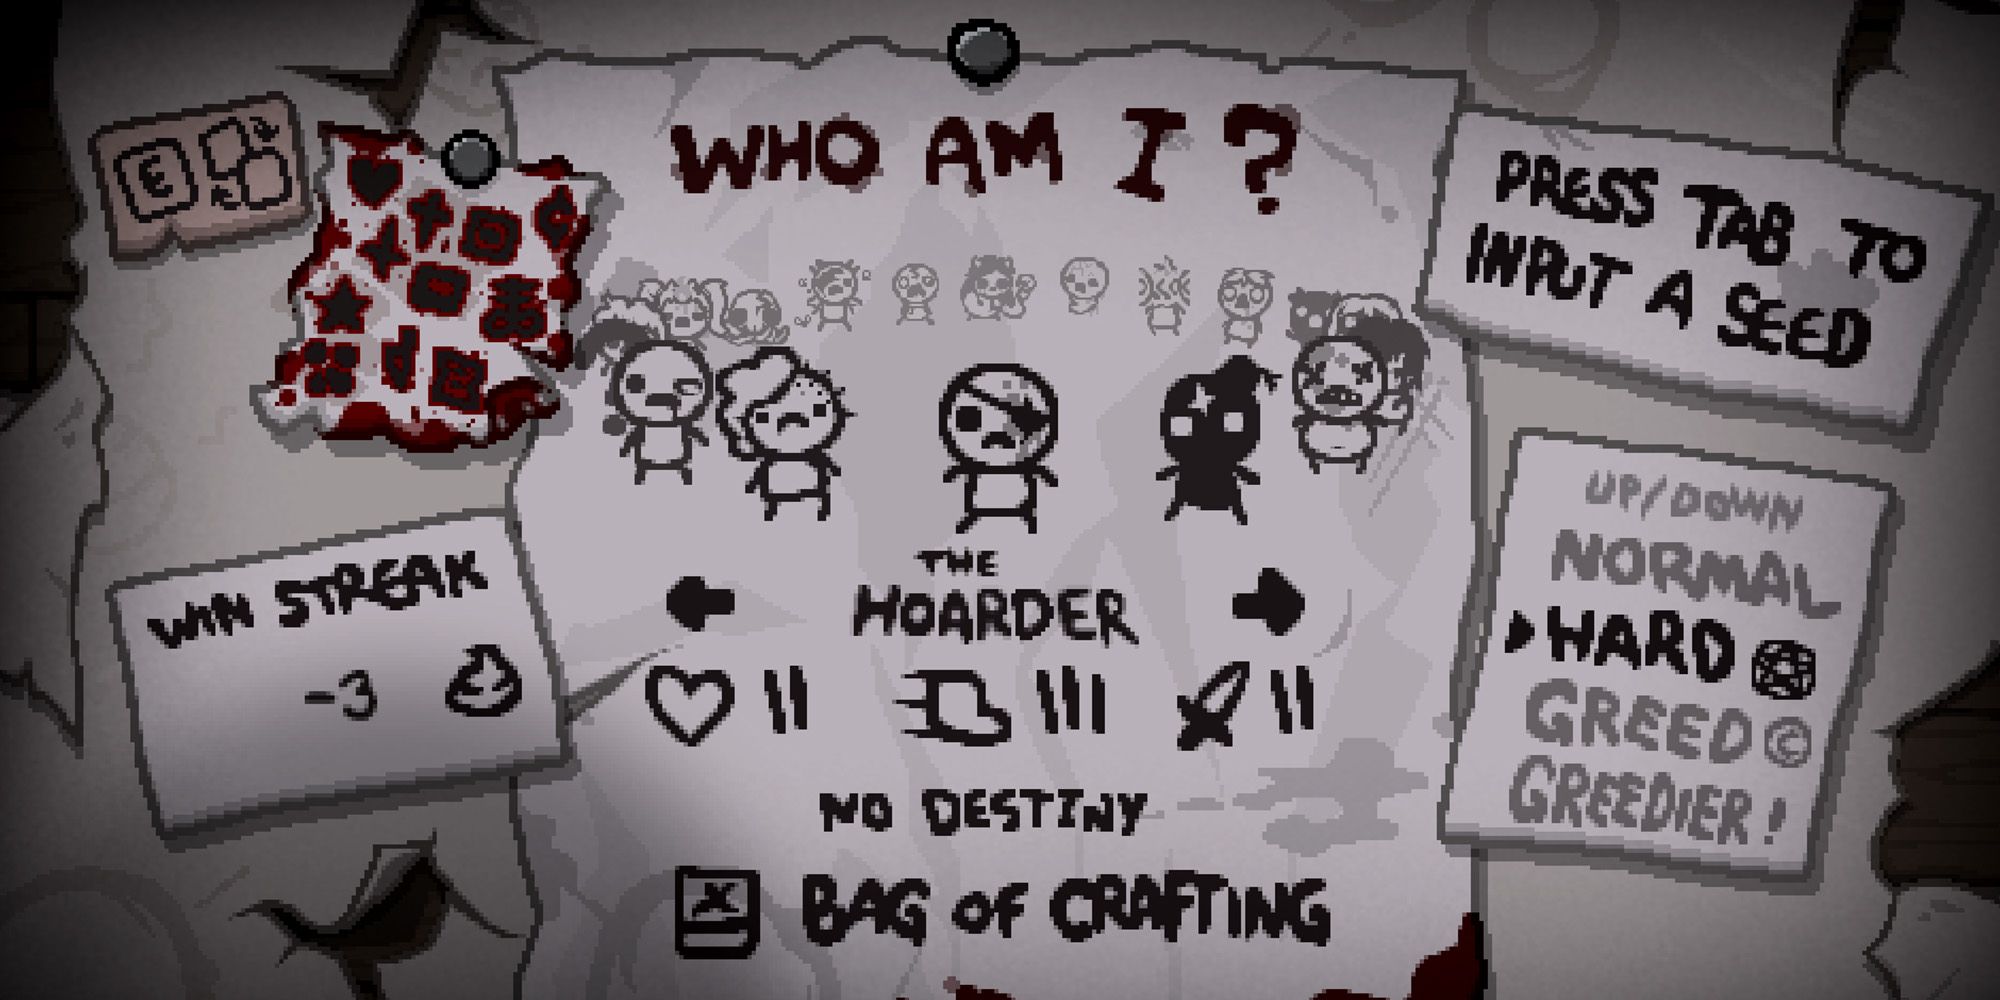 Binding of Isaac screenshot, character select screen, Tainted Cain's name replaced with The Hoarder